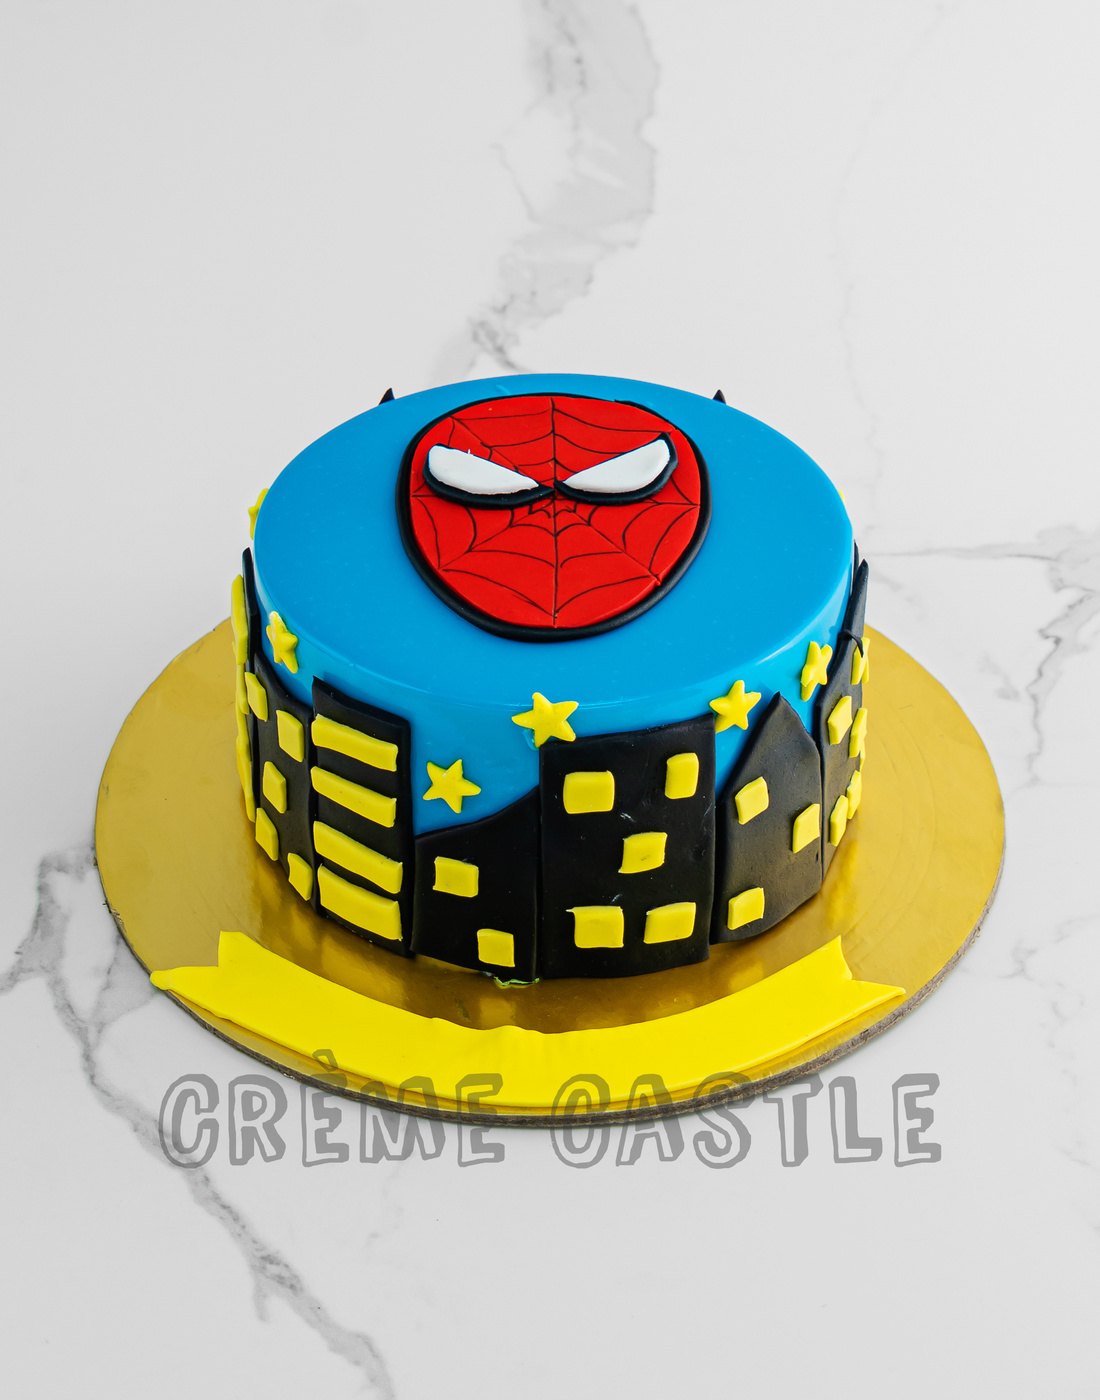 A New Comic Cake Design 🎂 . . Following the trend! #comiccake #trending  #cakedesign #cakes #fondant #fondantcake #cakecakecake #cakeboss… |  Instagram